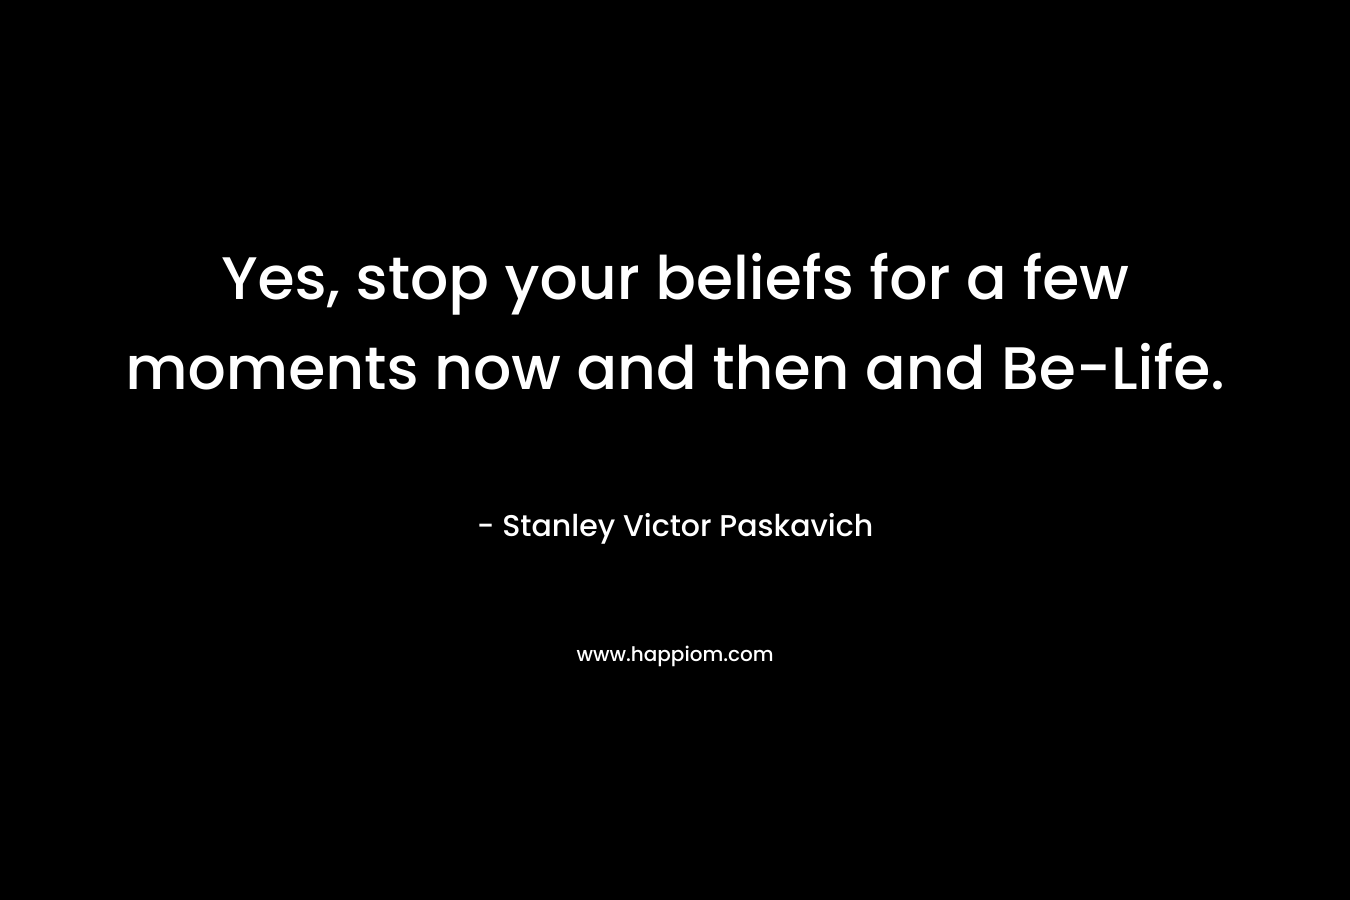 Yes, stop your beliefs for a few moments now and then and Be-Life.